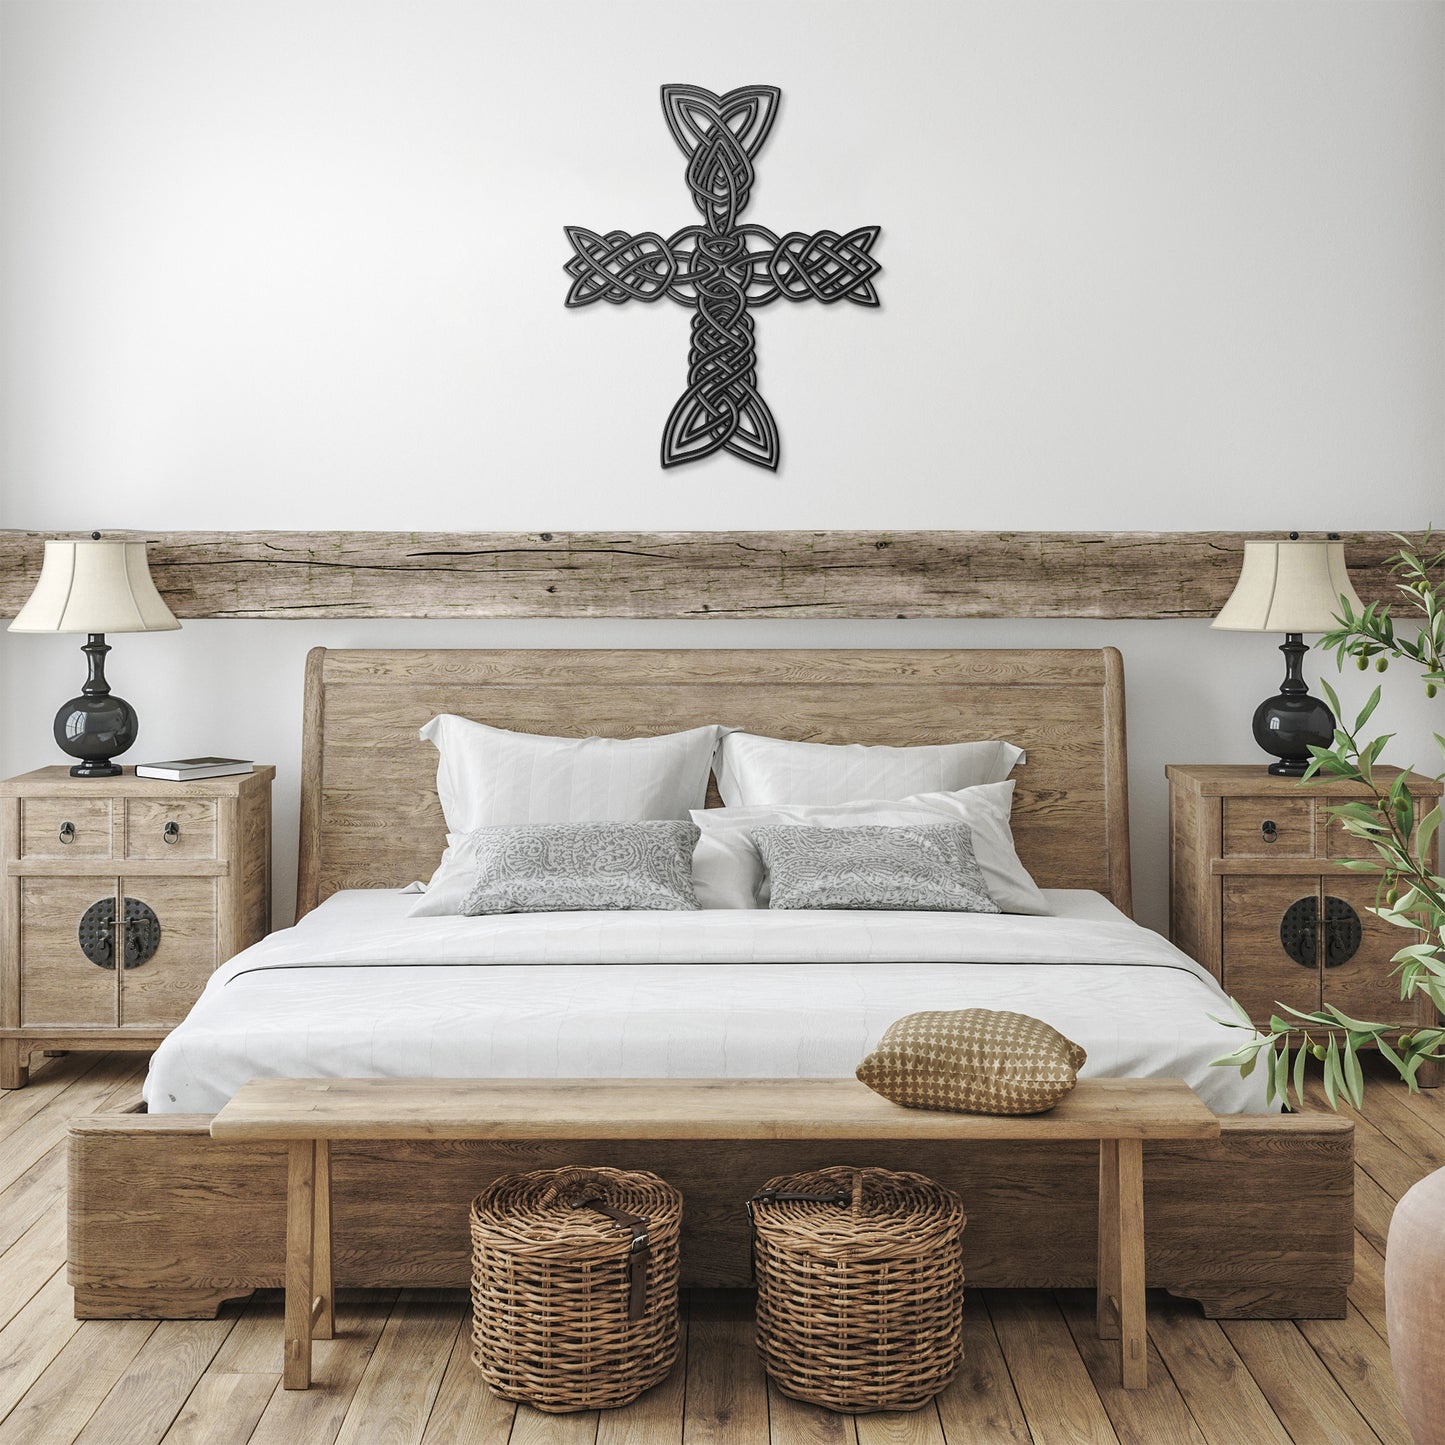 Unique Celtic Cross Metal Wall Art Irish Housewarming Gift Gaelic House Warming New Home Protection Symbol of Faith Culture Unity